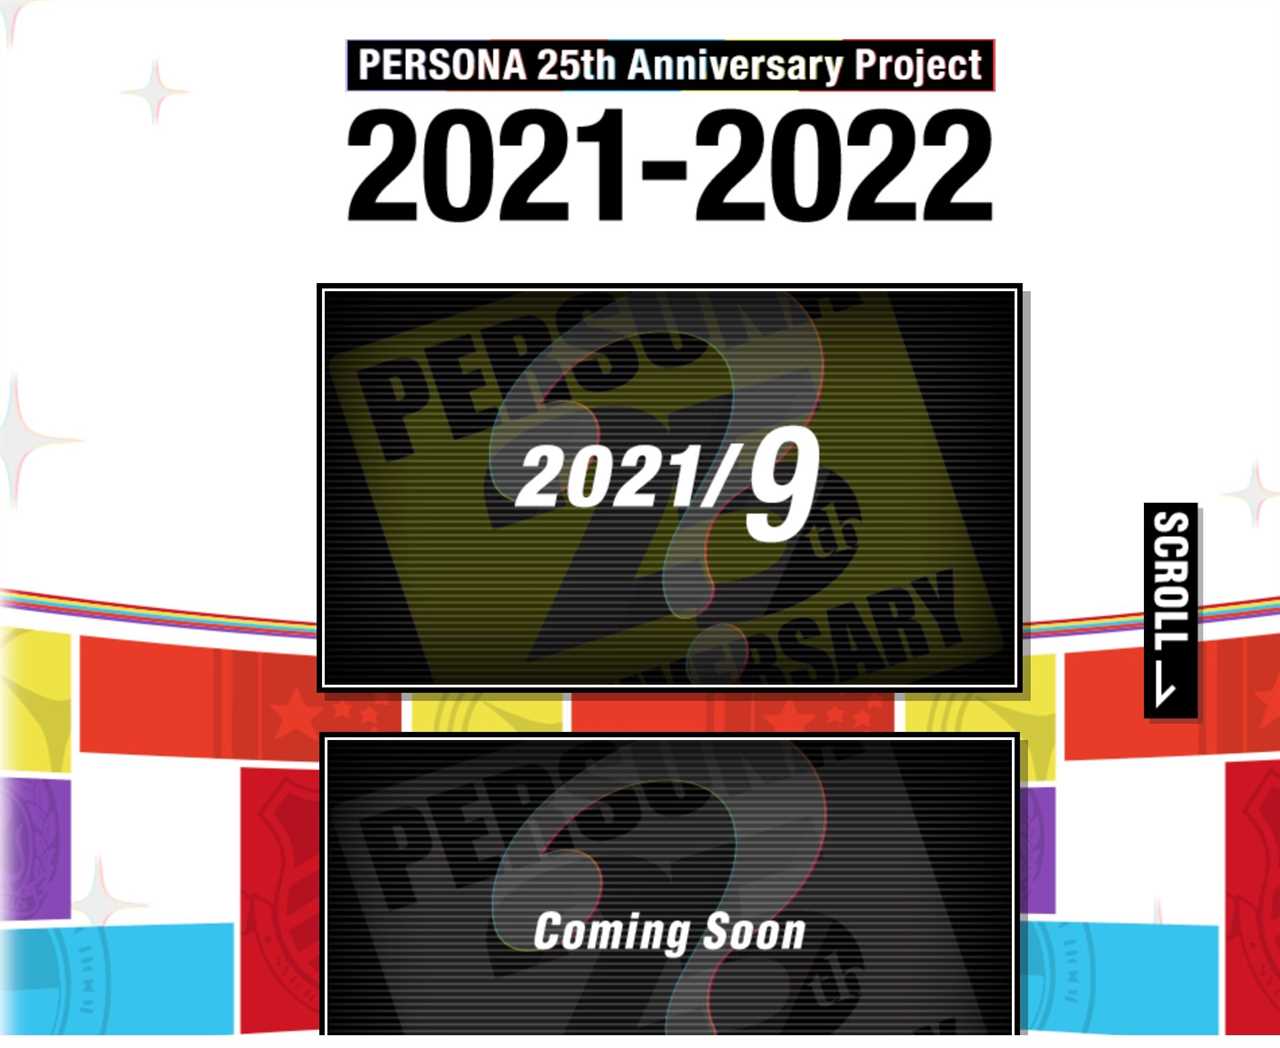 Persona 25th Anniversary: 7 Upcoming Reveals Teased on New Atlus Website